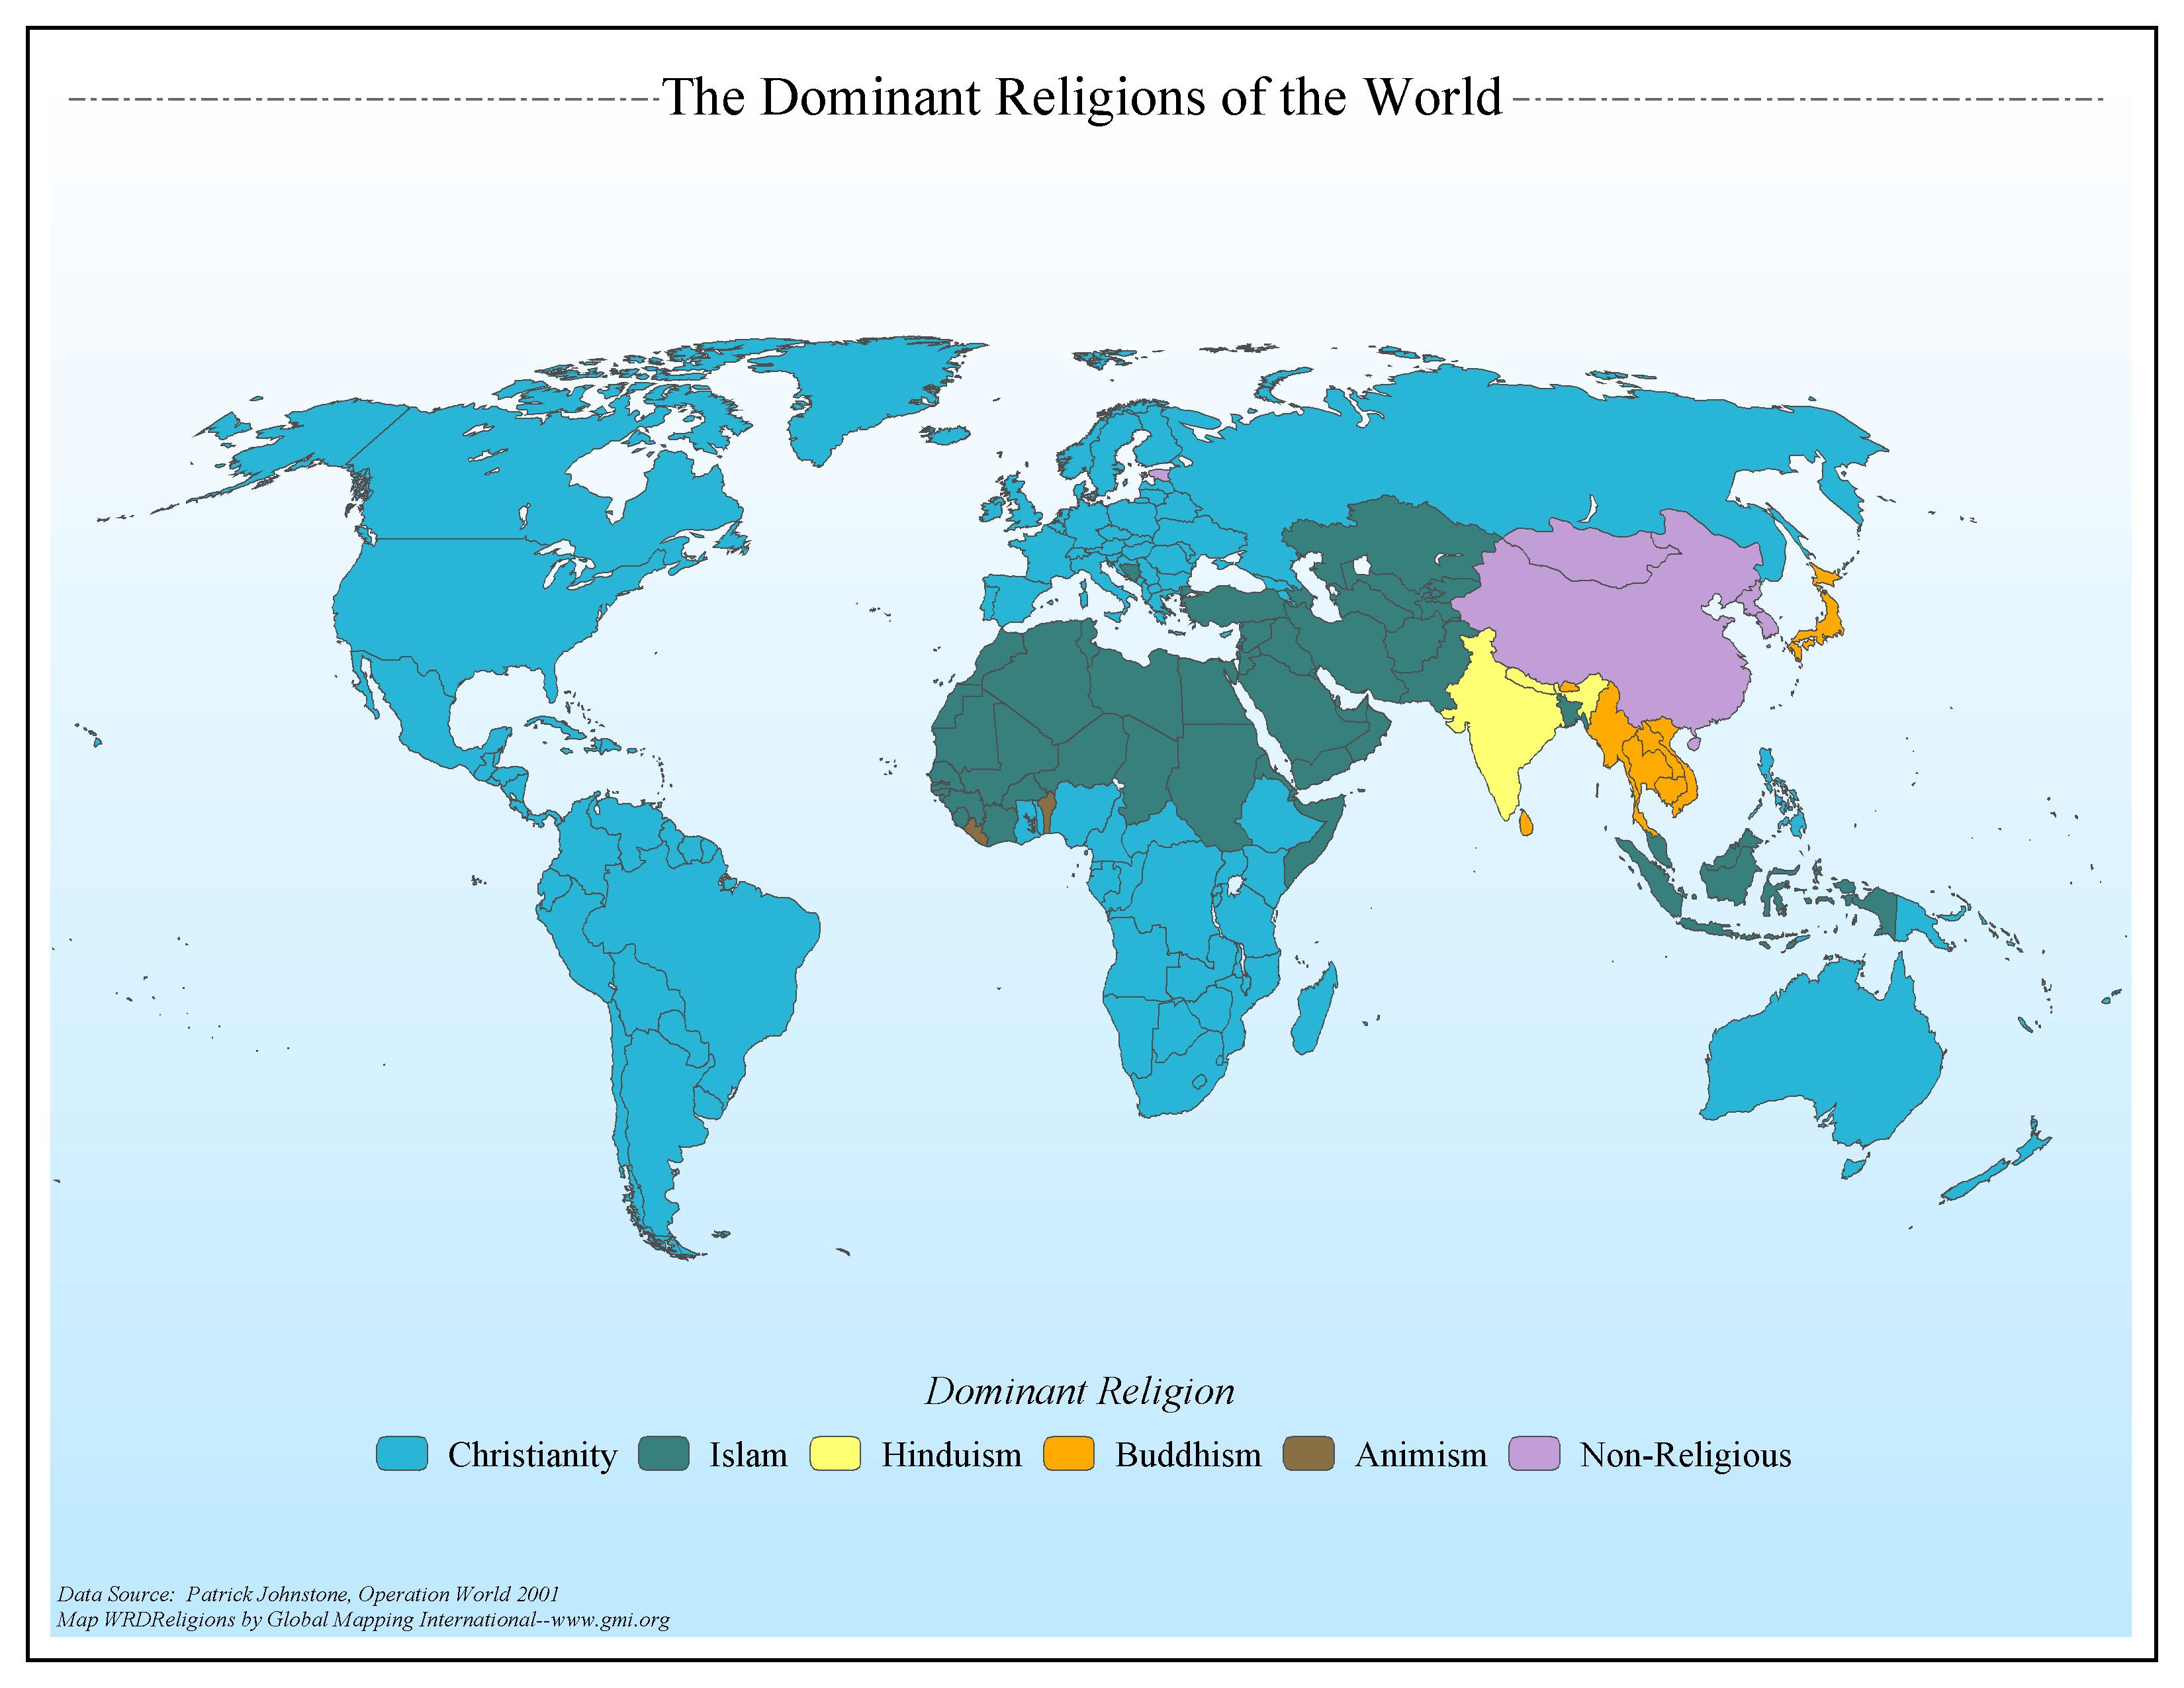 The Dominant Religions of the World